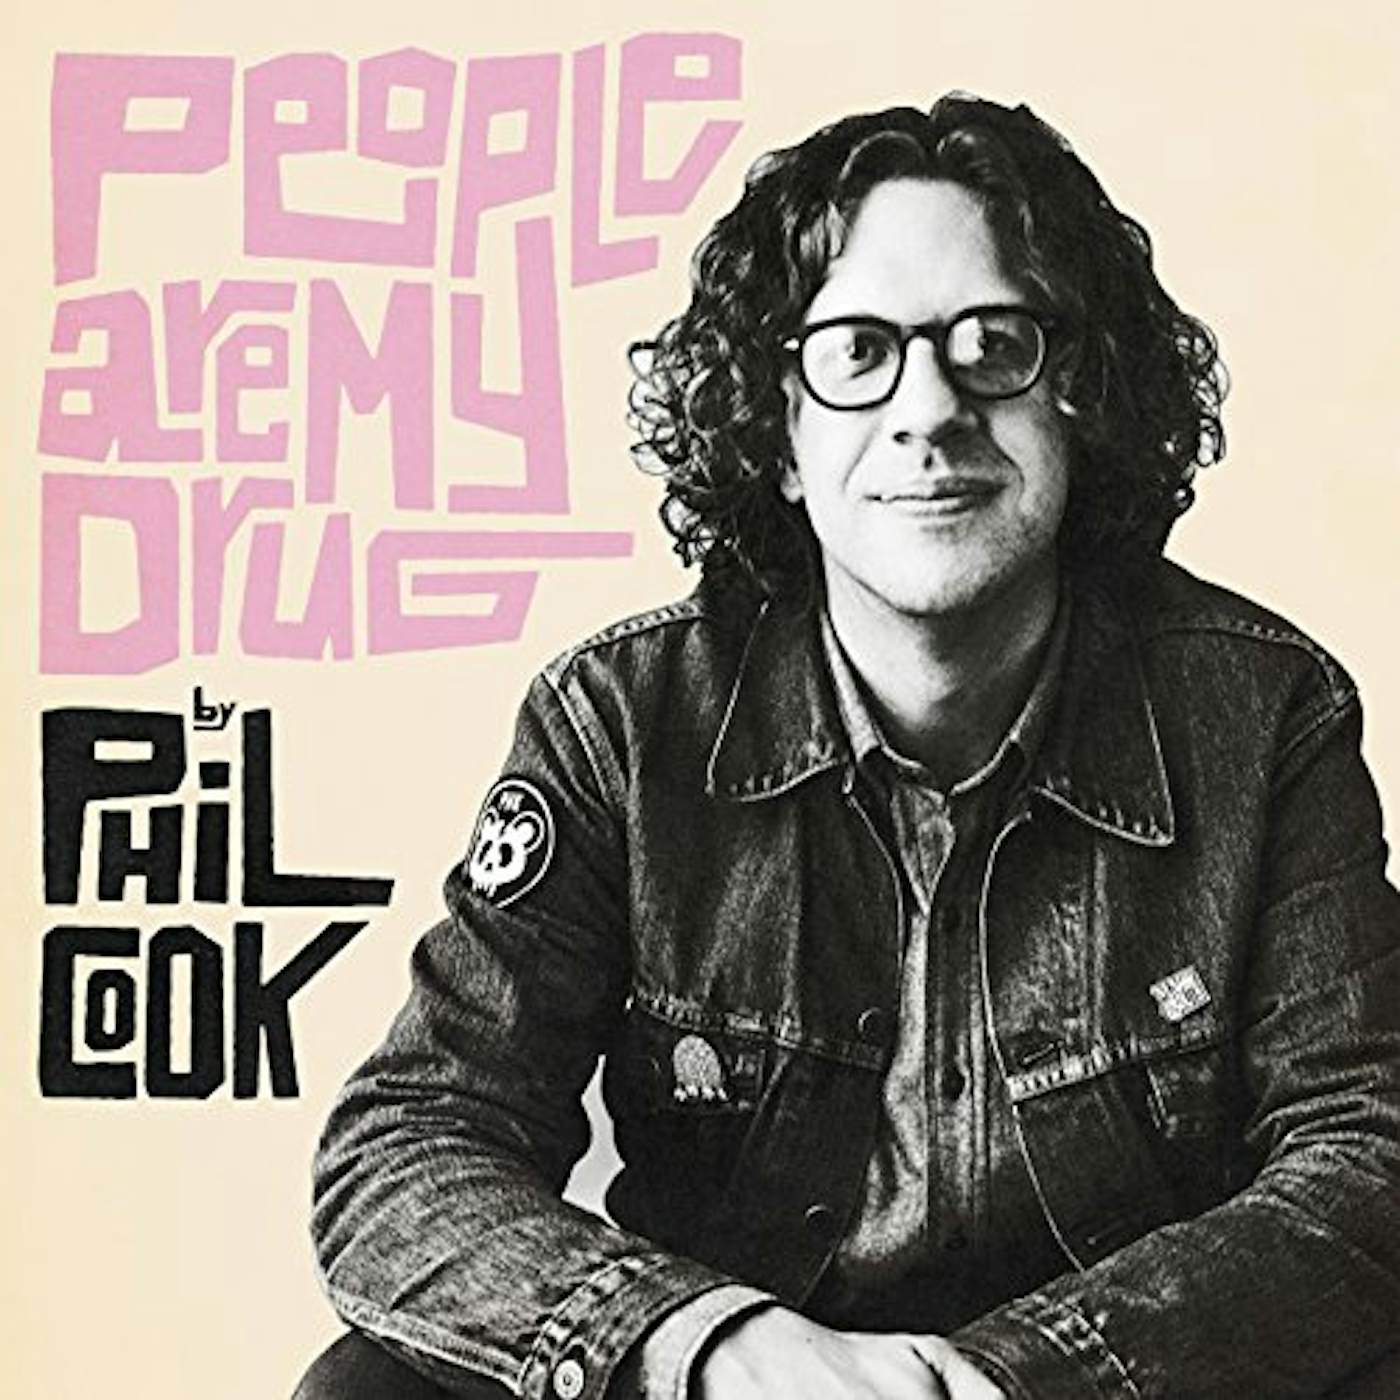 Phil Cook PEOPLE ARE MY DRUG CD